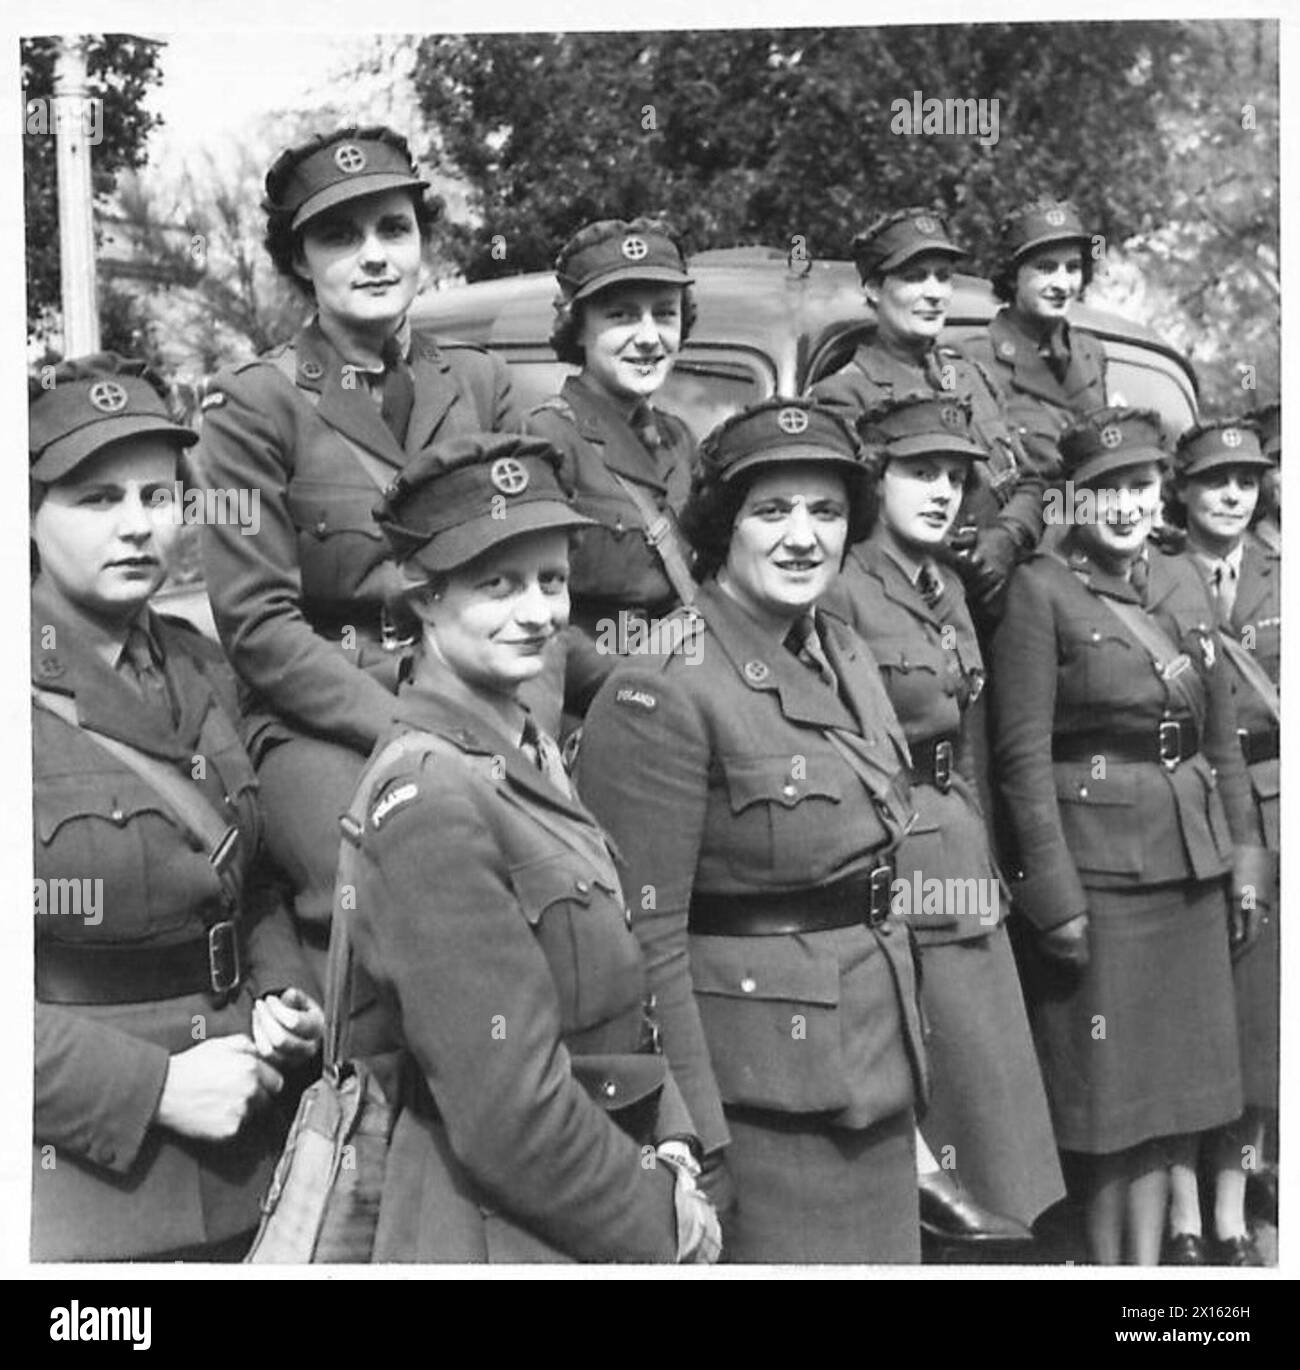 THE POLISH ARMY IN BRITAIN, 1940-1947 - Diana Napier was a well known actress and wife of Richard Tauber, the Austrian-born opera singer, in her private life. Diana Napier (second from the right, front row), a section commander of the First Aid Nursing Yeomanry (FANY) unit attached to the 1st Polish Corps, with some members of her unit at Cupar, 1 June 1941 British Army, British Army, First Aid Nursing Yeomanry, Polish Army, Polish Armed Forces in the West, 1st Corps, Napier, Diana Stock Photo